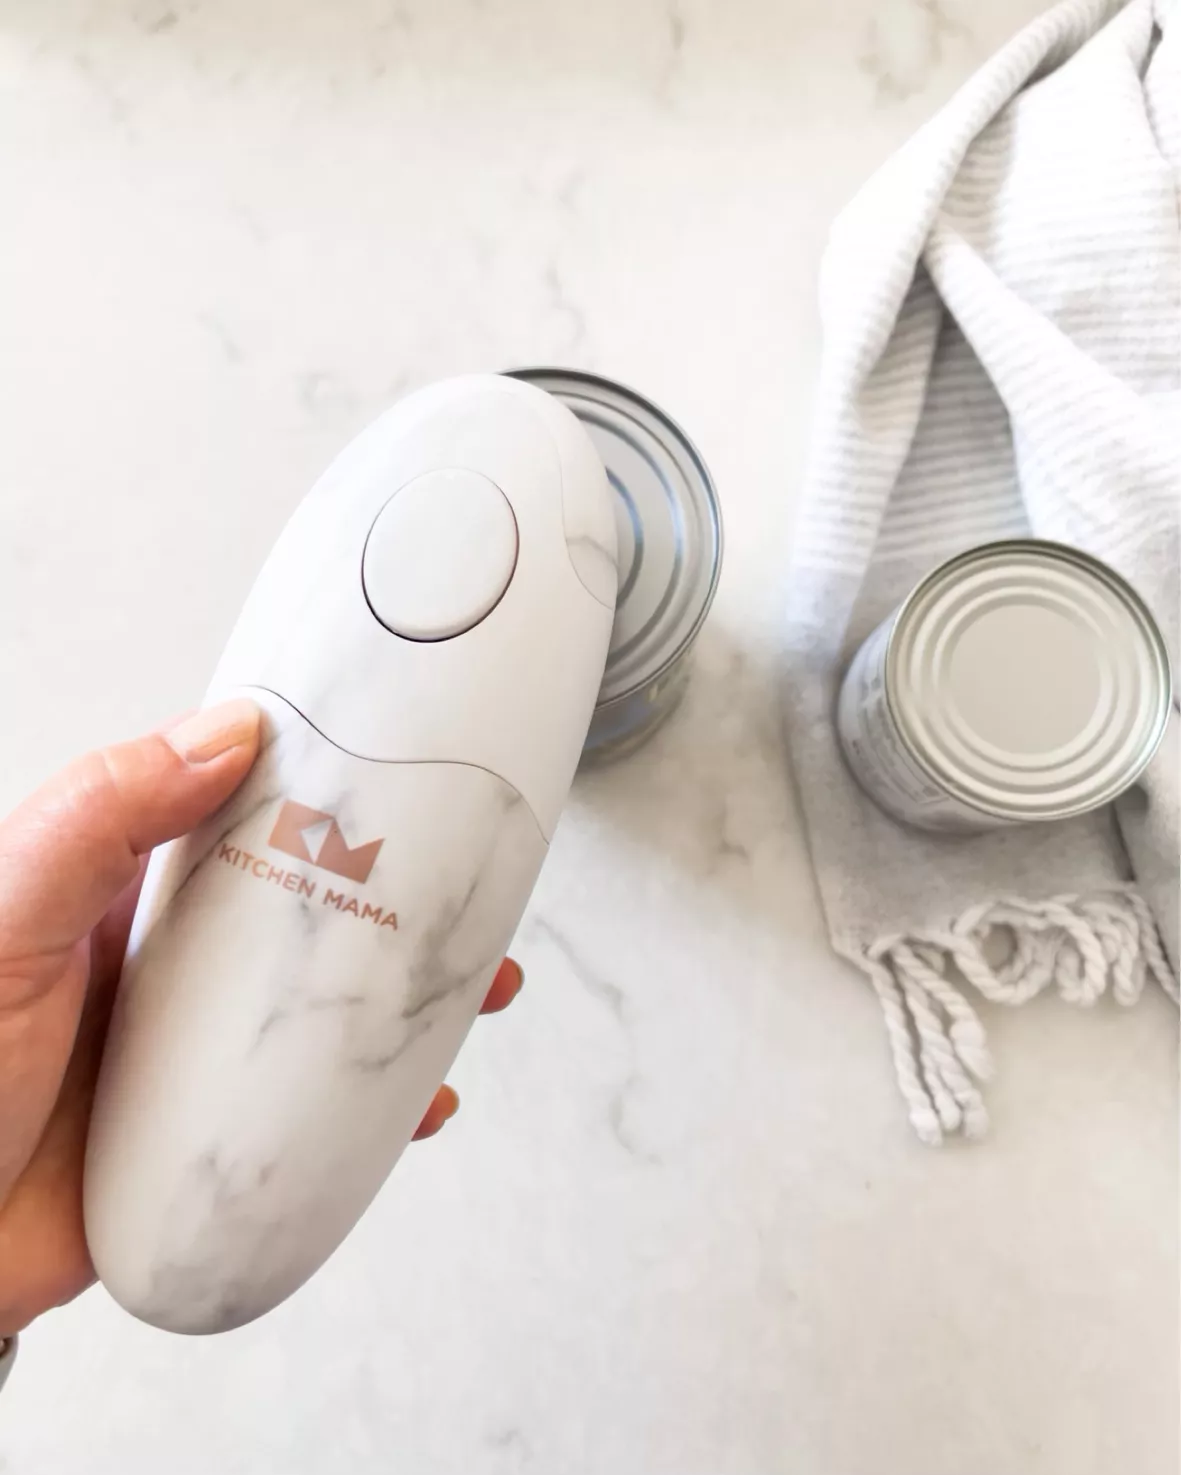 How to Use Kitchen Mama Auto Electric Can Opener 2.0